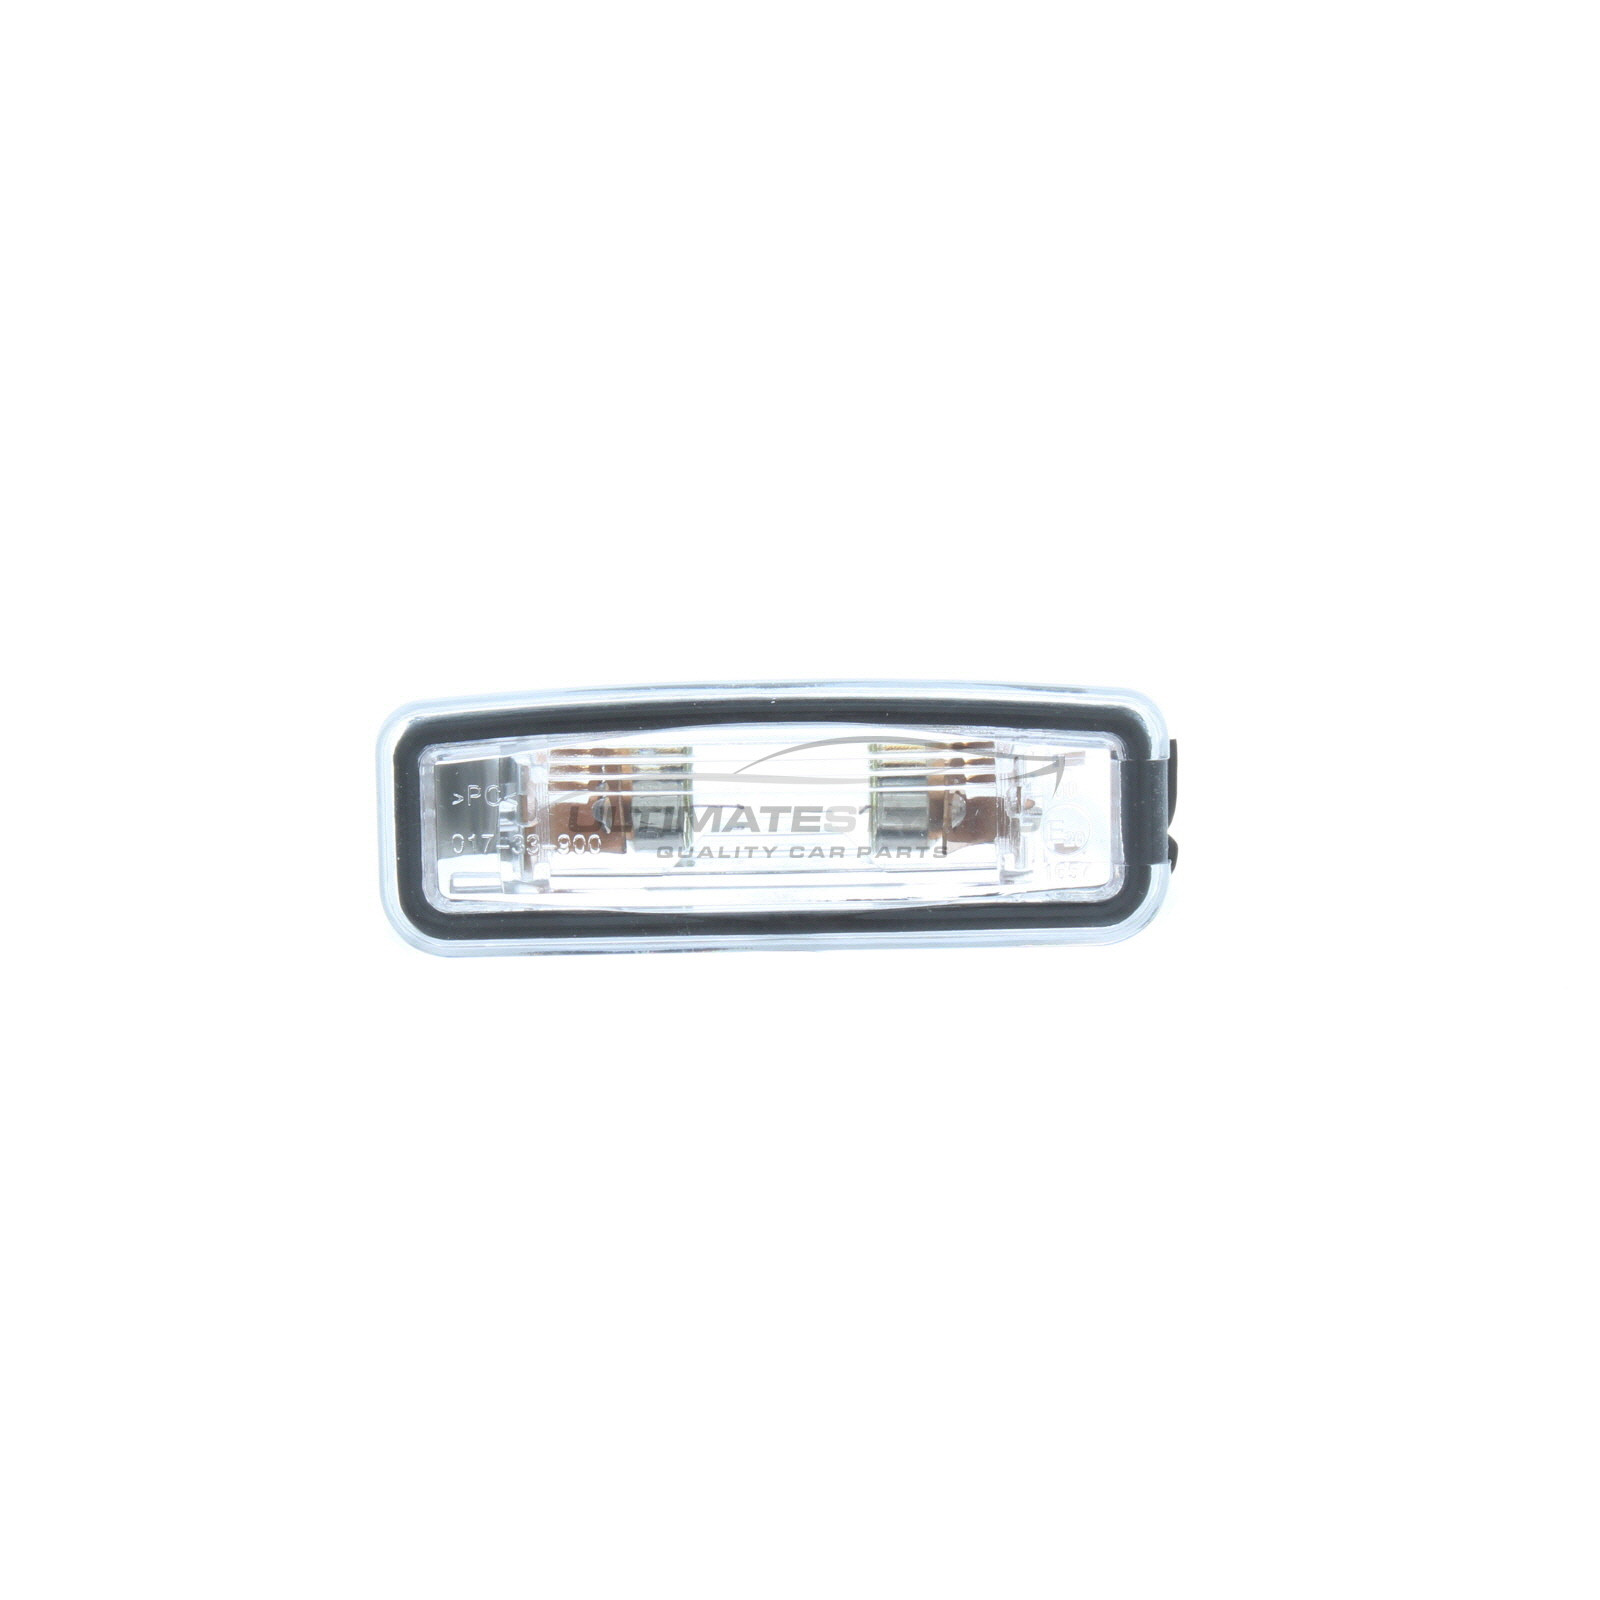 Rear Number Plate Light for Ford Focus